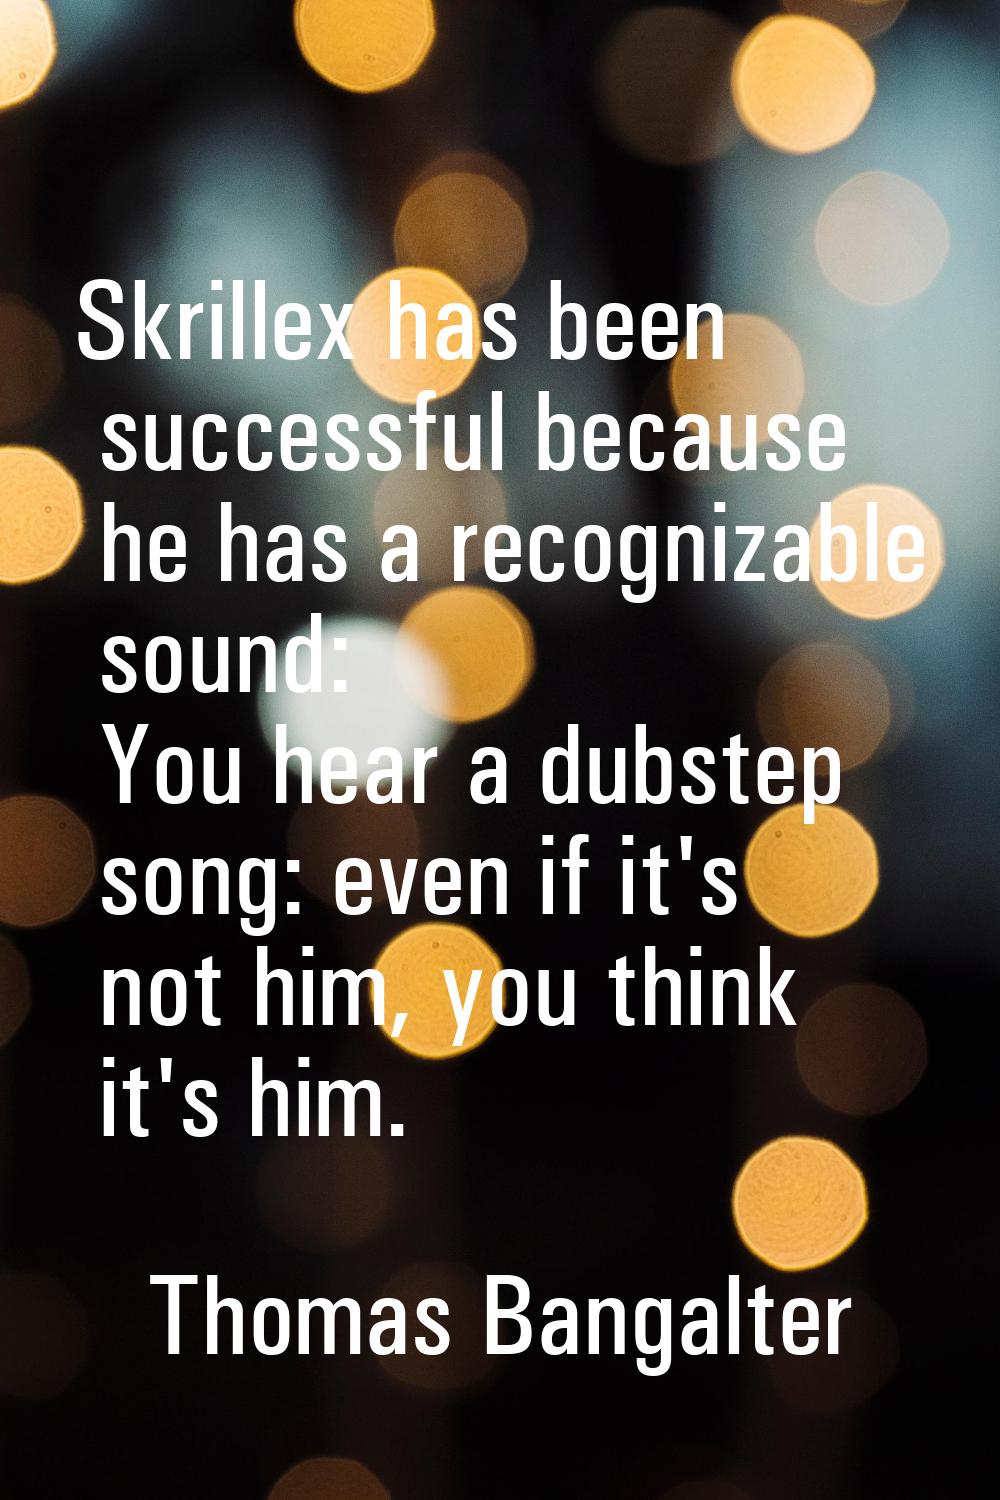 Skrillex has been successful because he has a recognizable sound: You hear a dubstep song: even if 